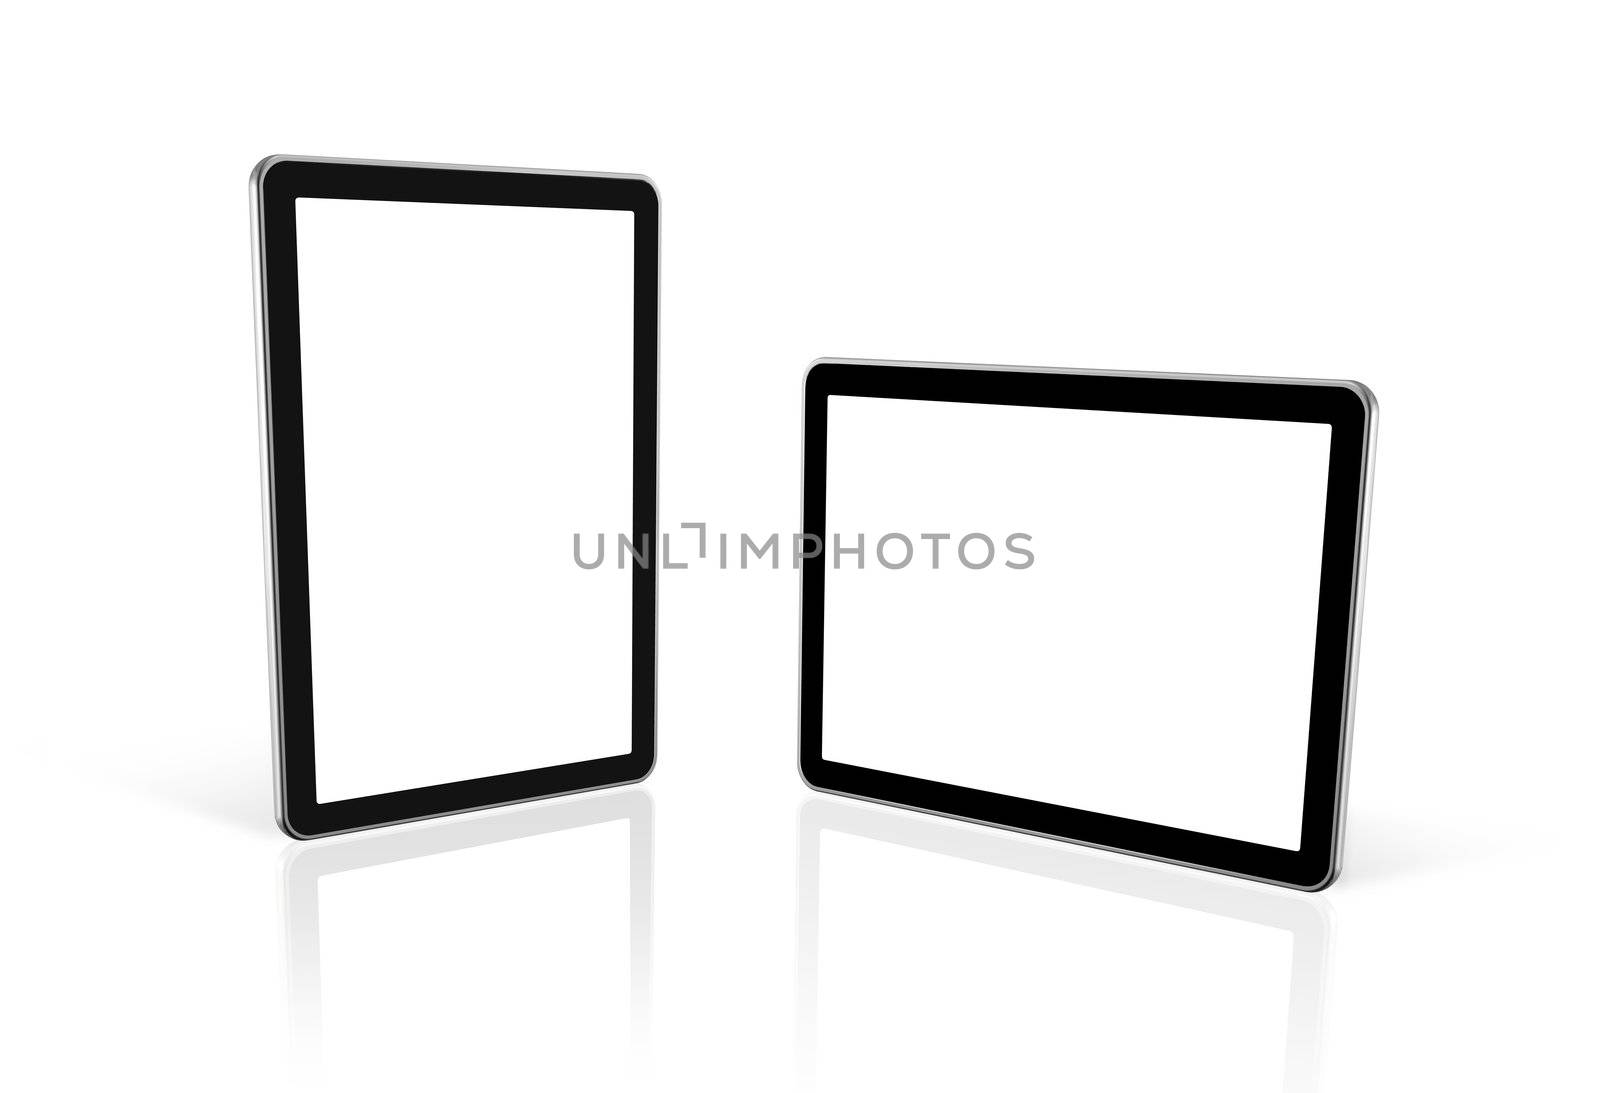 two 3D computers, digital Tablet pc,  tv screen, isolated on white with 2 clipping paths : one for screen and one for global scene